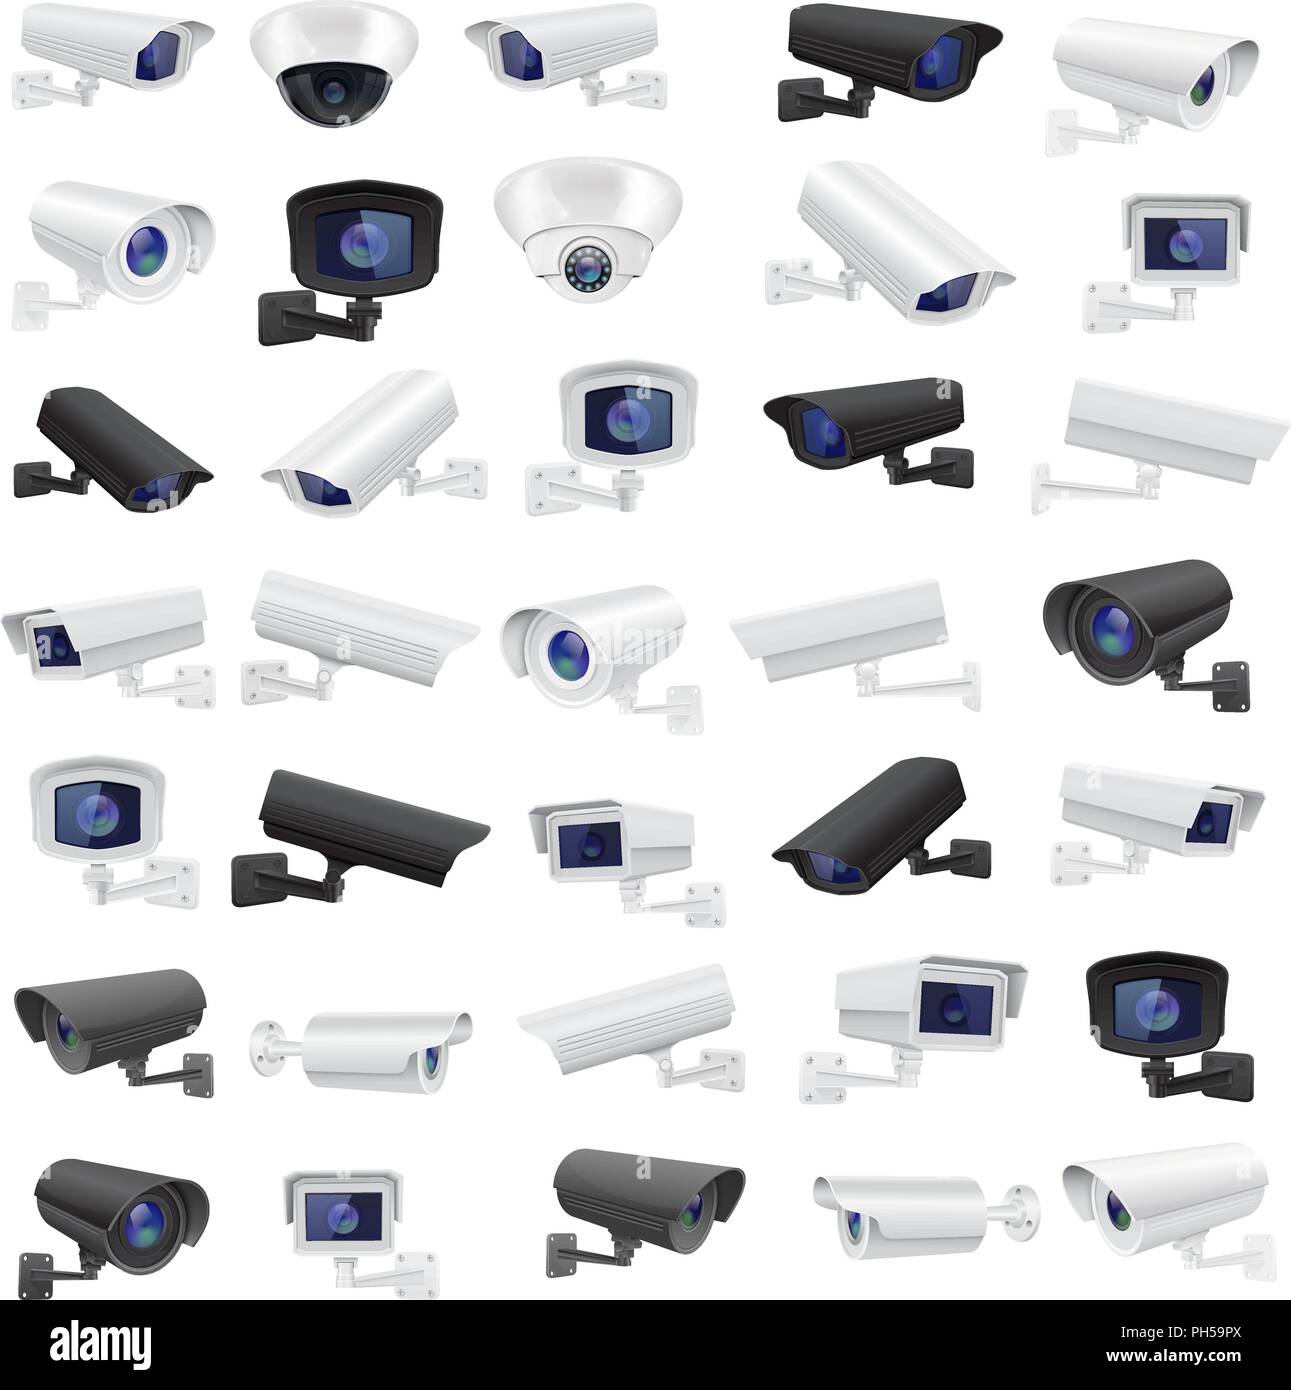 CCTV security camera. Large collection of black and white surveillance devices Stock Vector